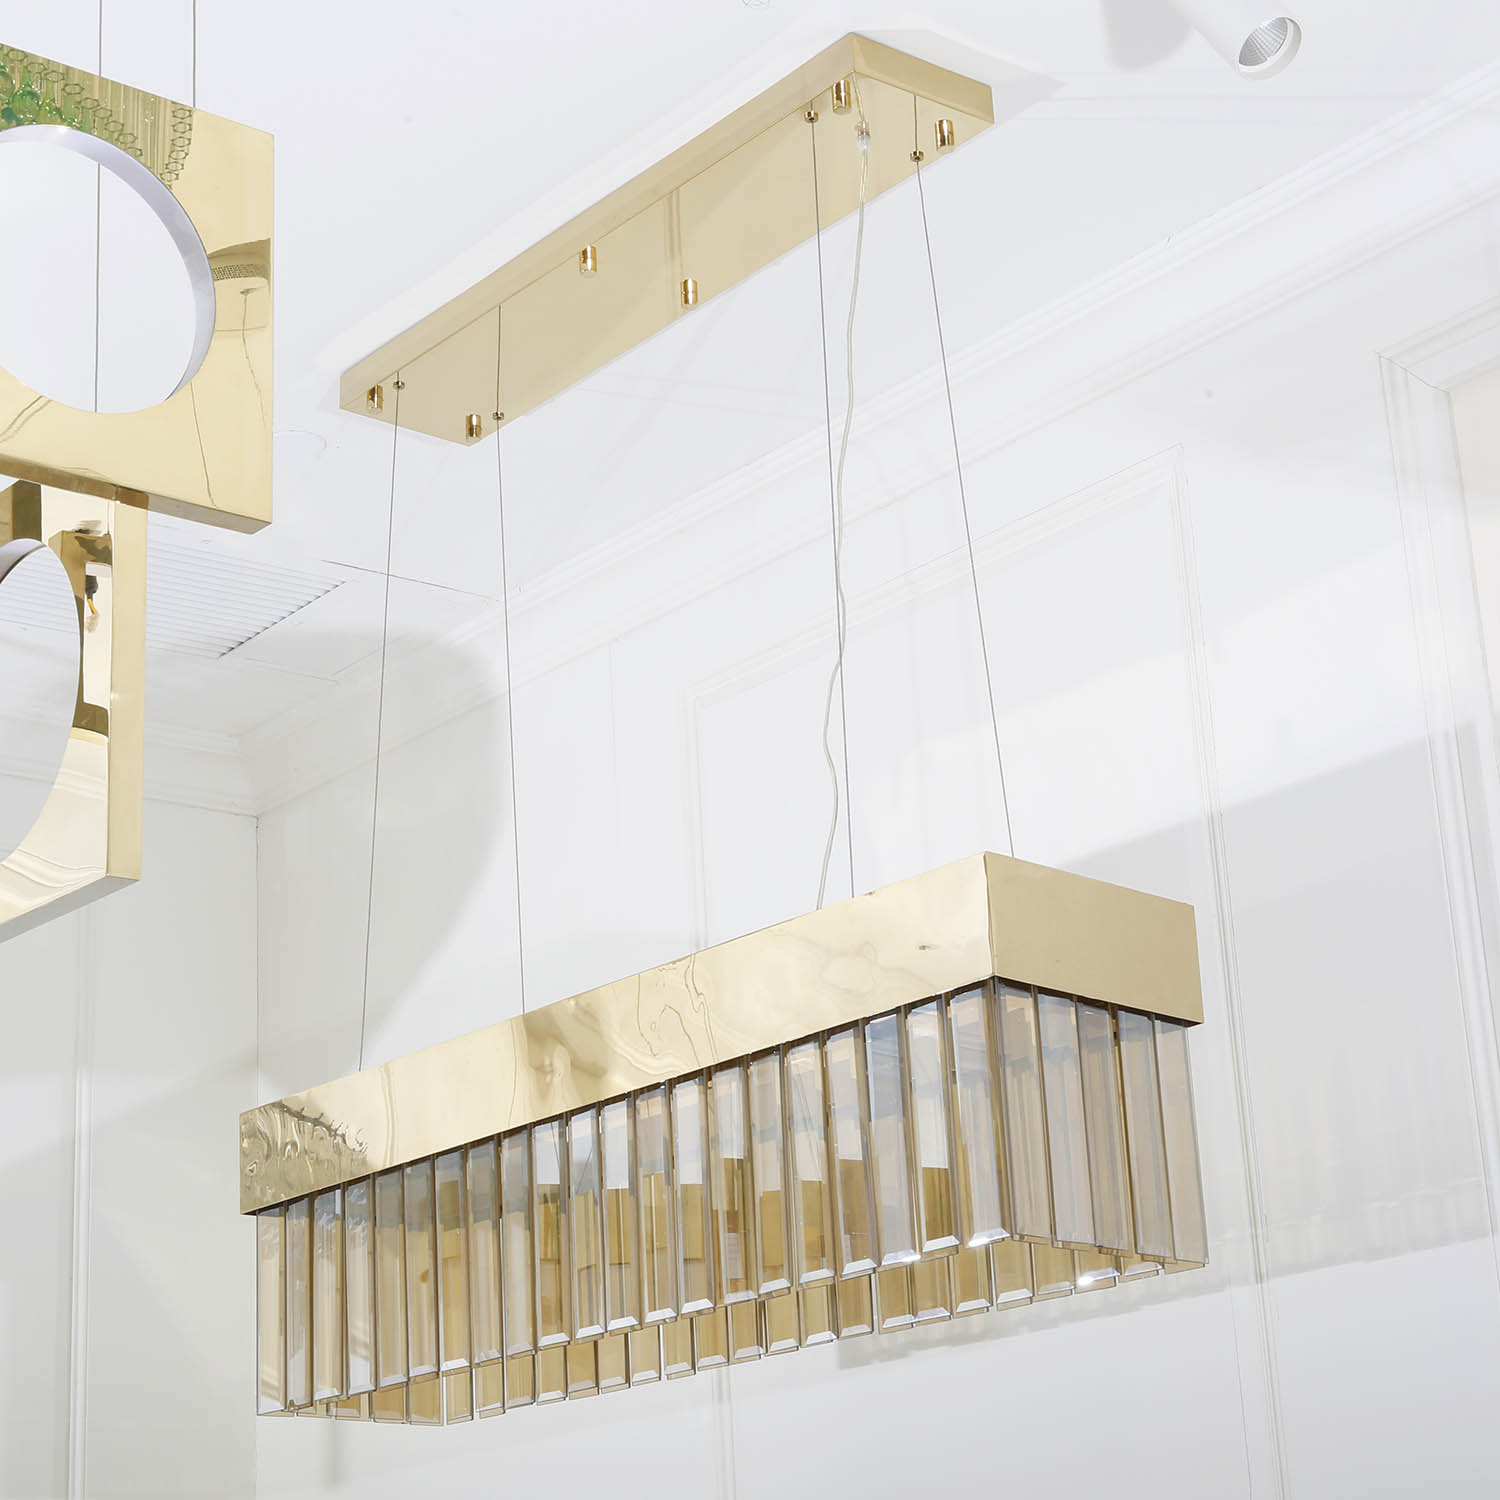 Rectangle Box Gold Guest Hall Ceiling Pendant Lamp (KA516-P-S)